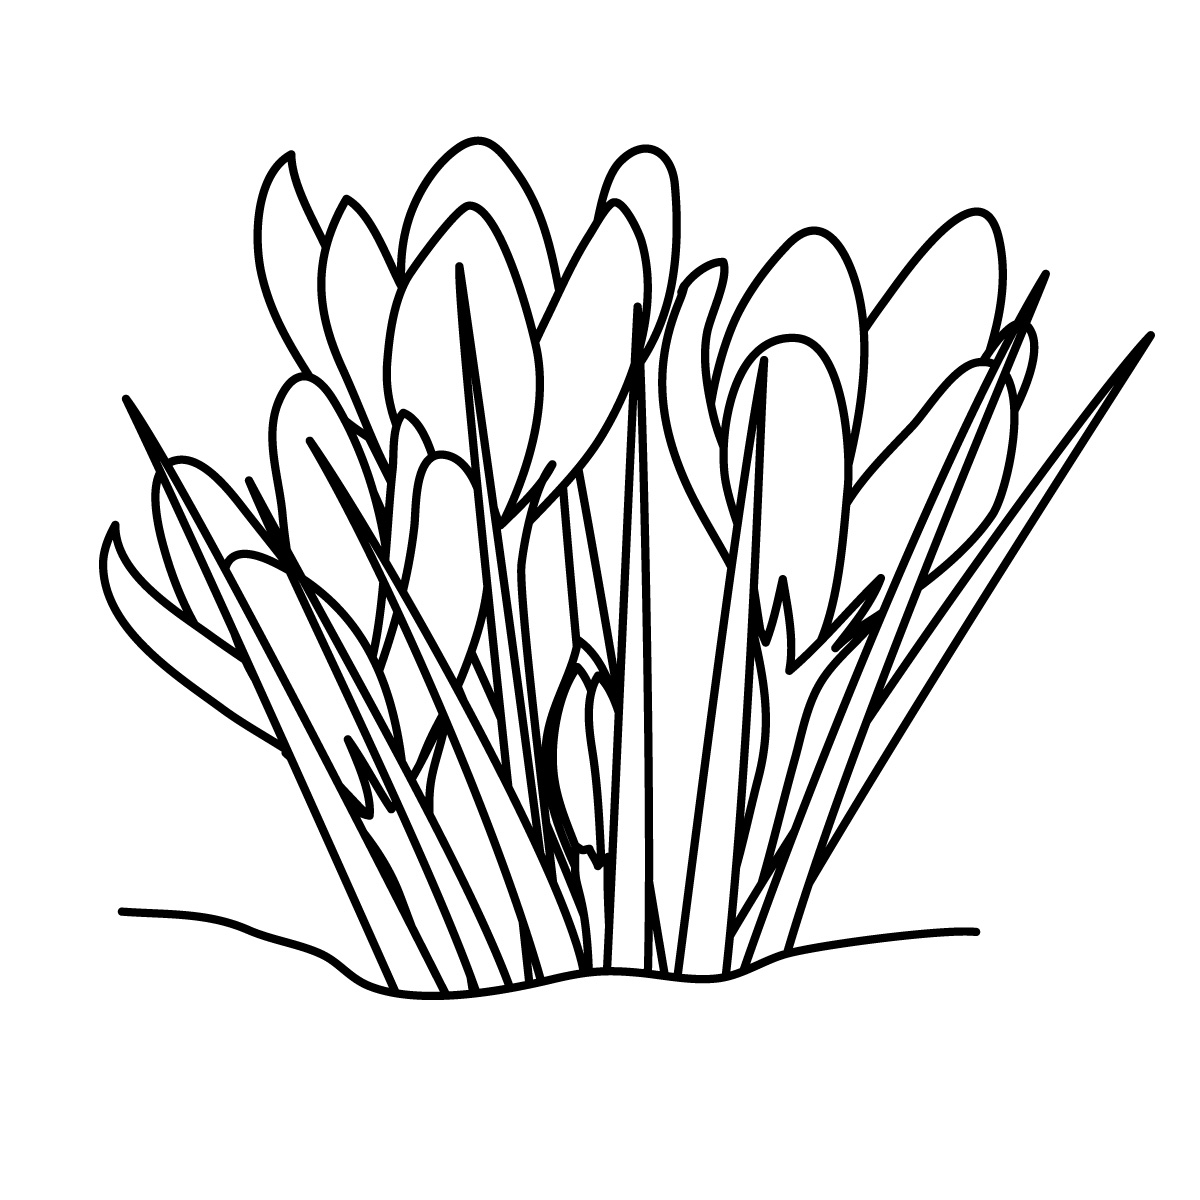 spring tree clipart black and white